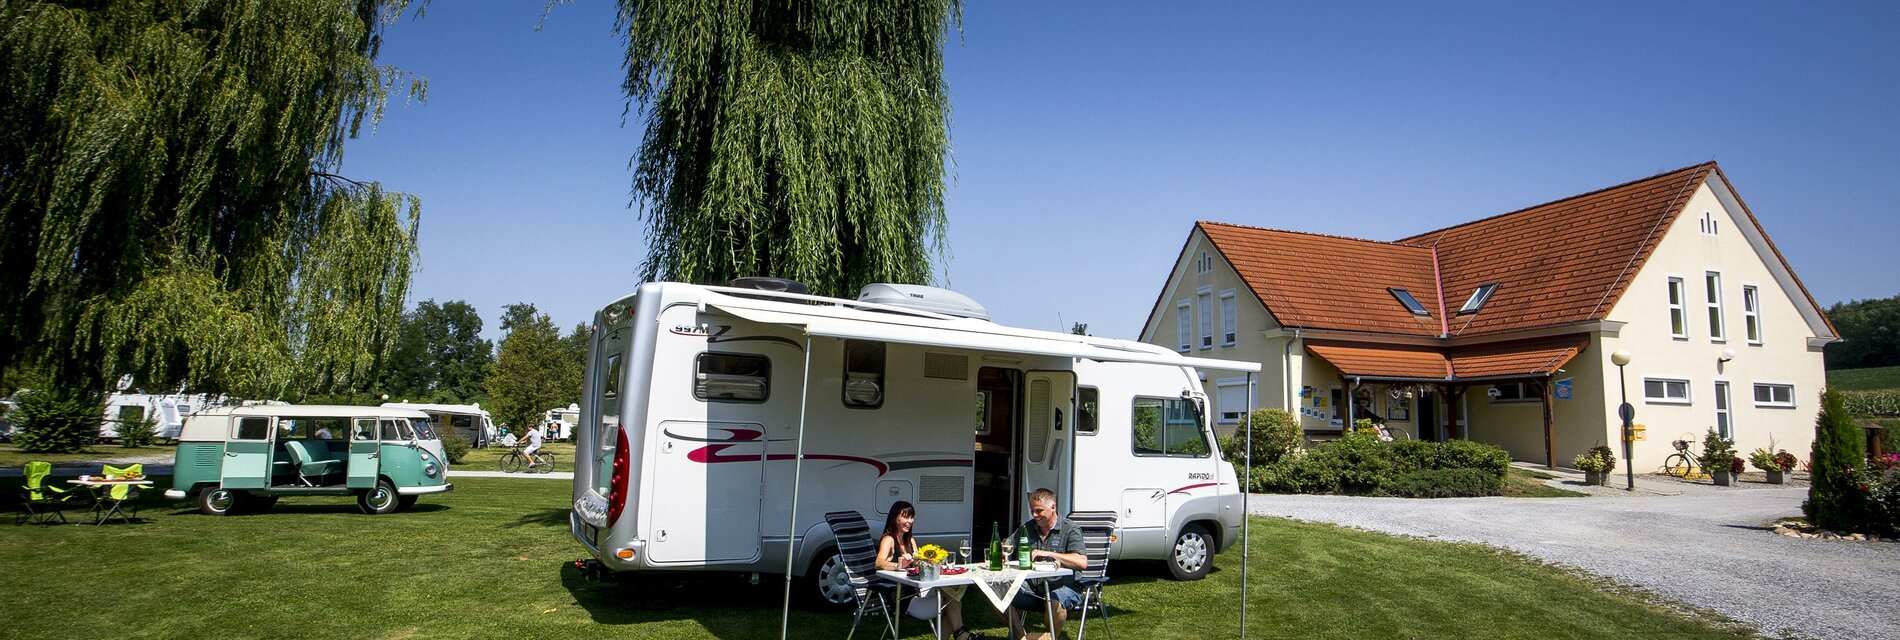 Thermenland_Camping_Rath___Pichler